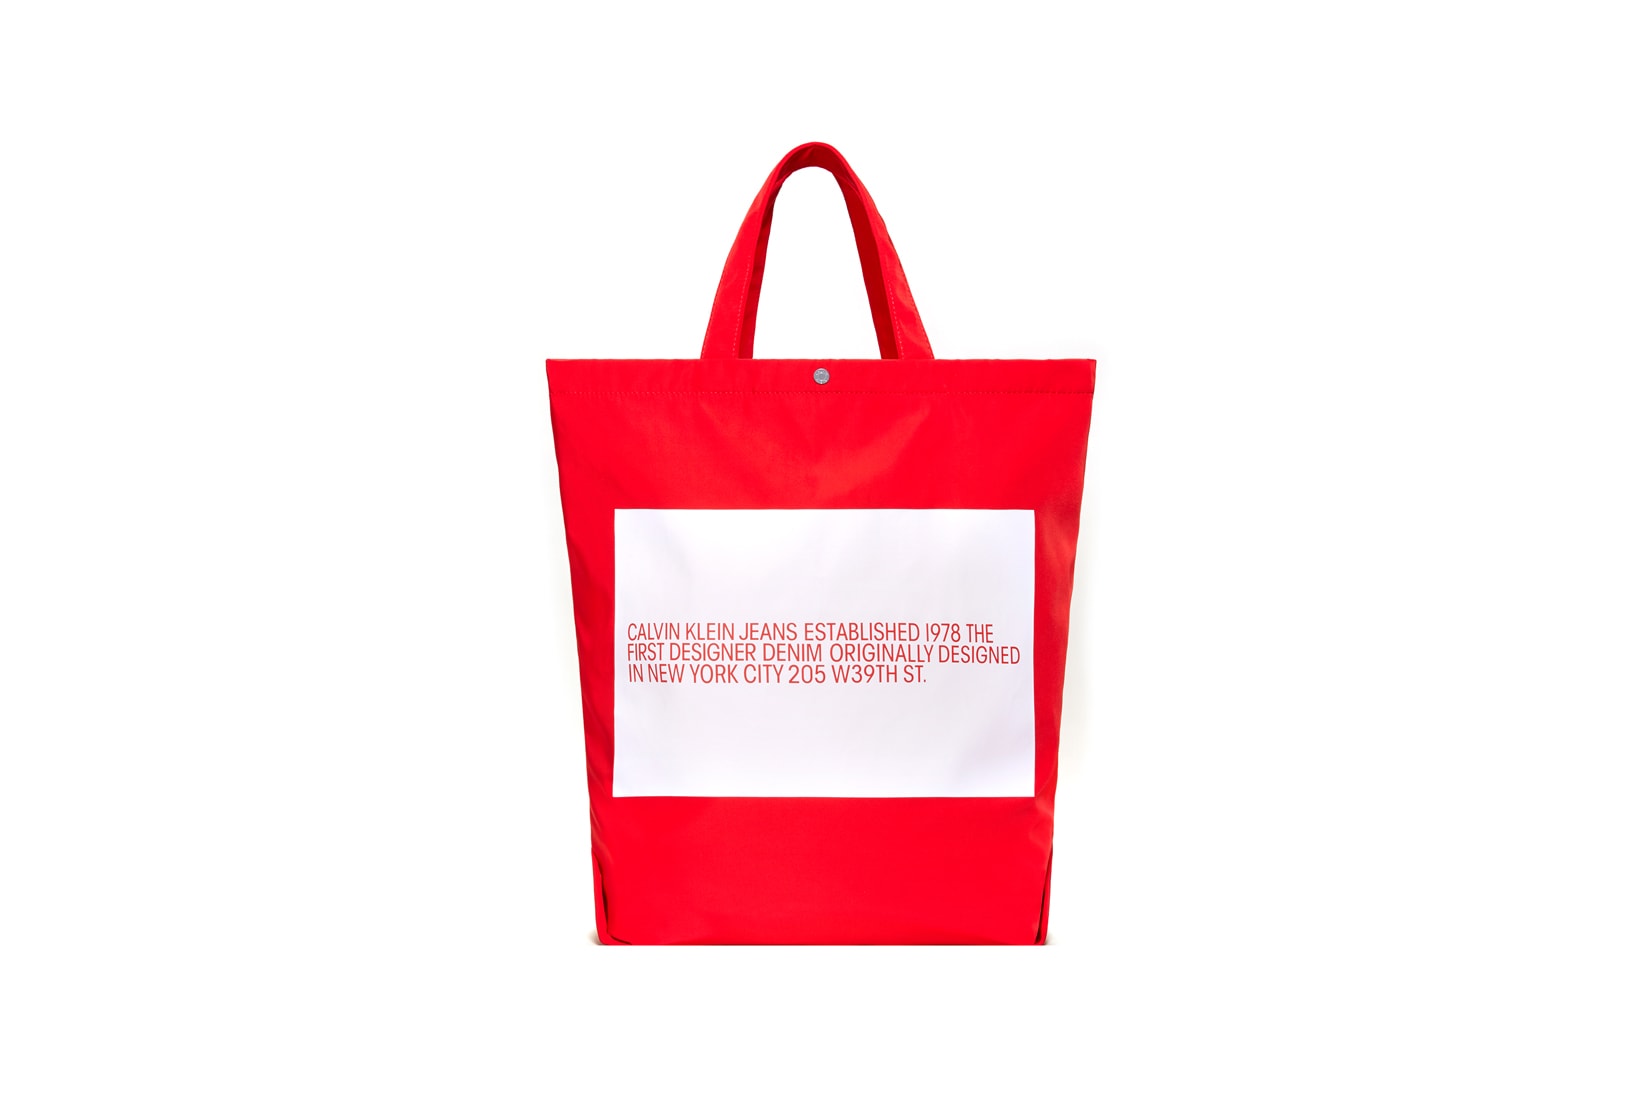 CALVIN KLEIN JEANS EST. 1978 Delivery 2 Drop 02 Tote Red